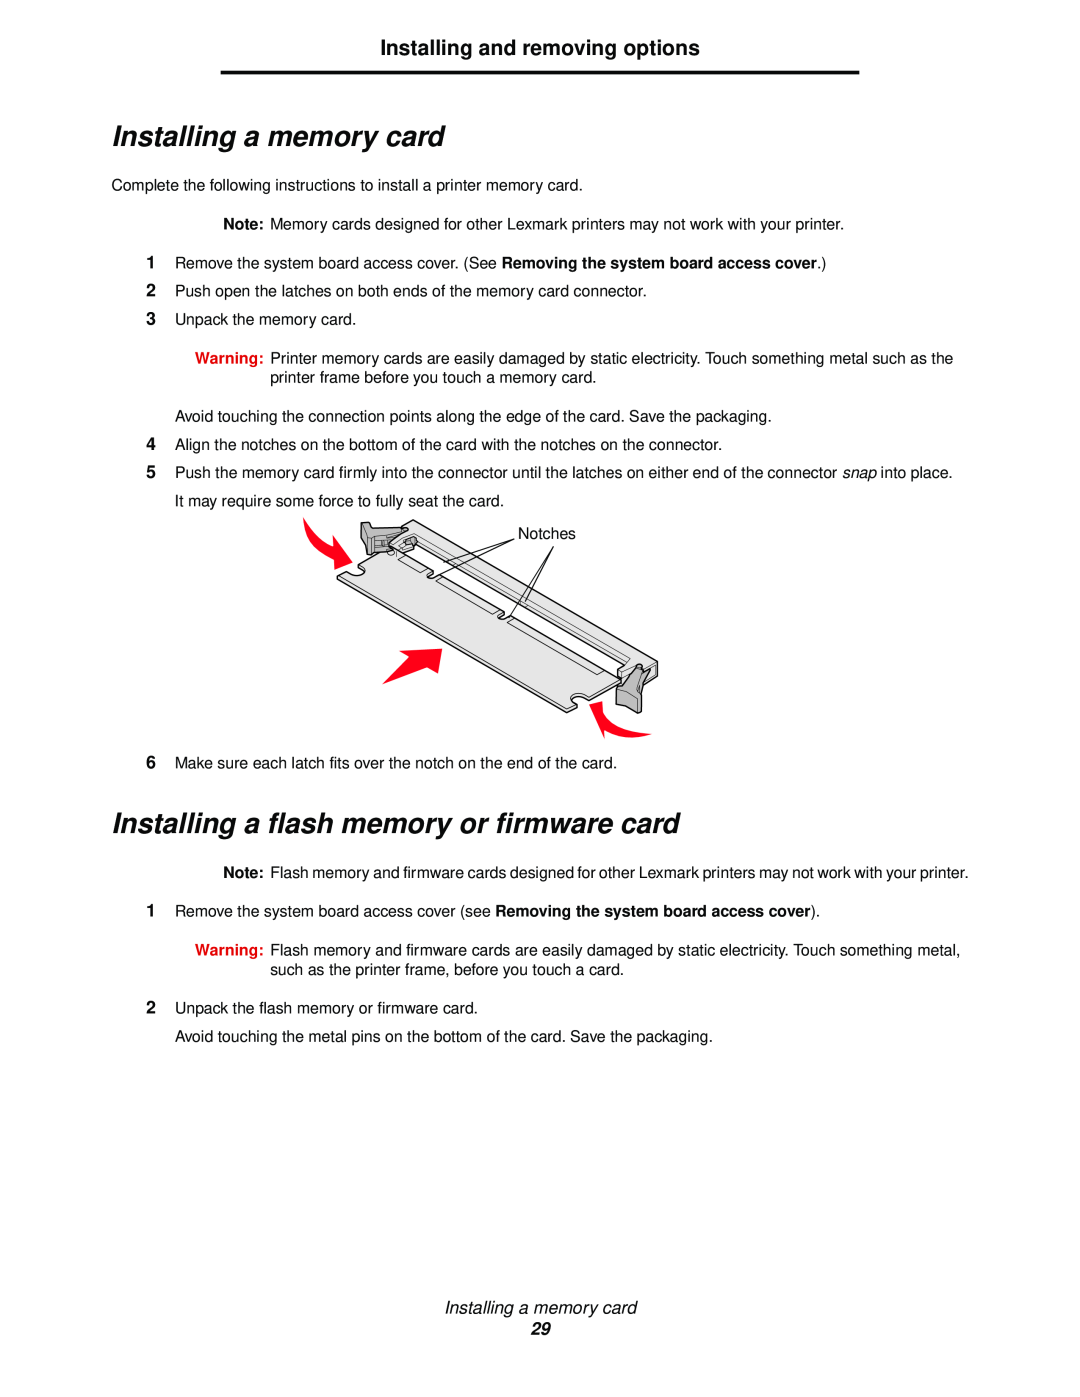 Lexmark 920 manual Installing a memory card, Installing a flash memory or firmware card, Installing and removing options 